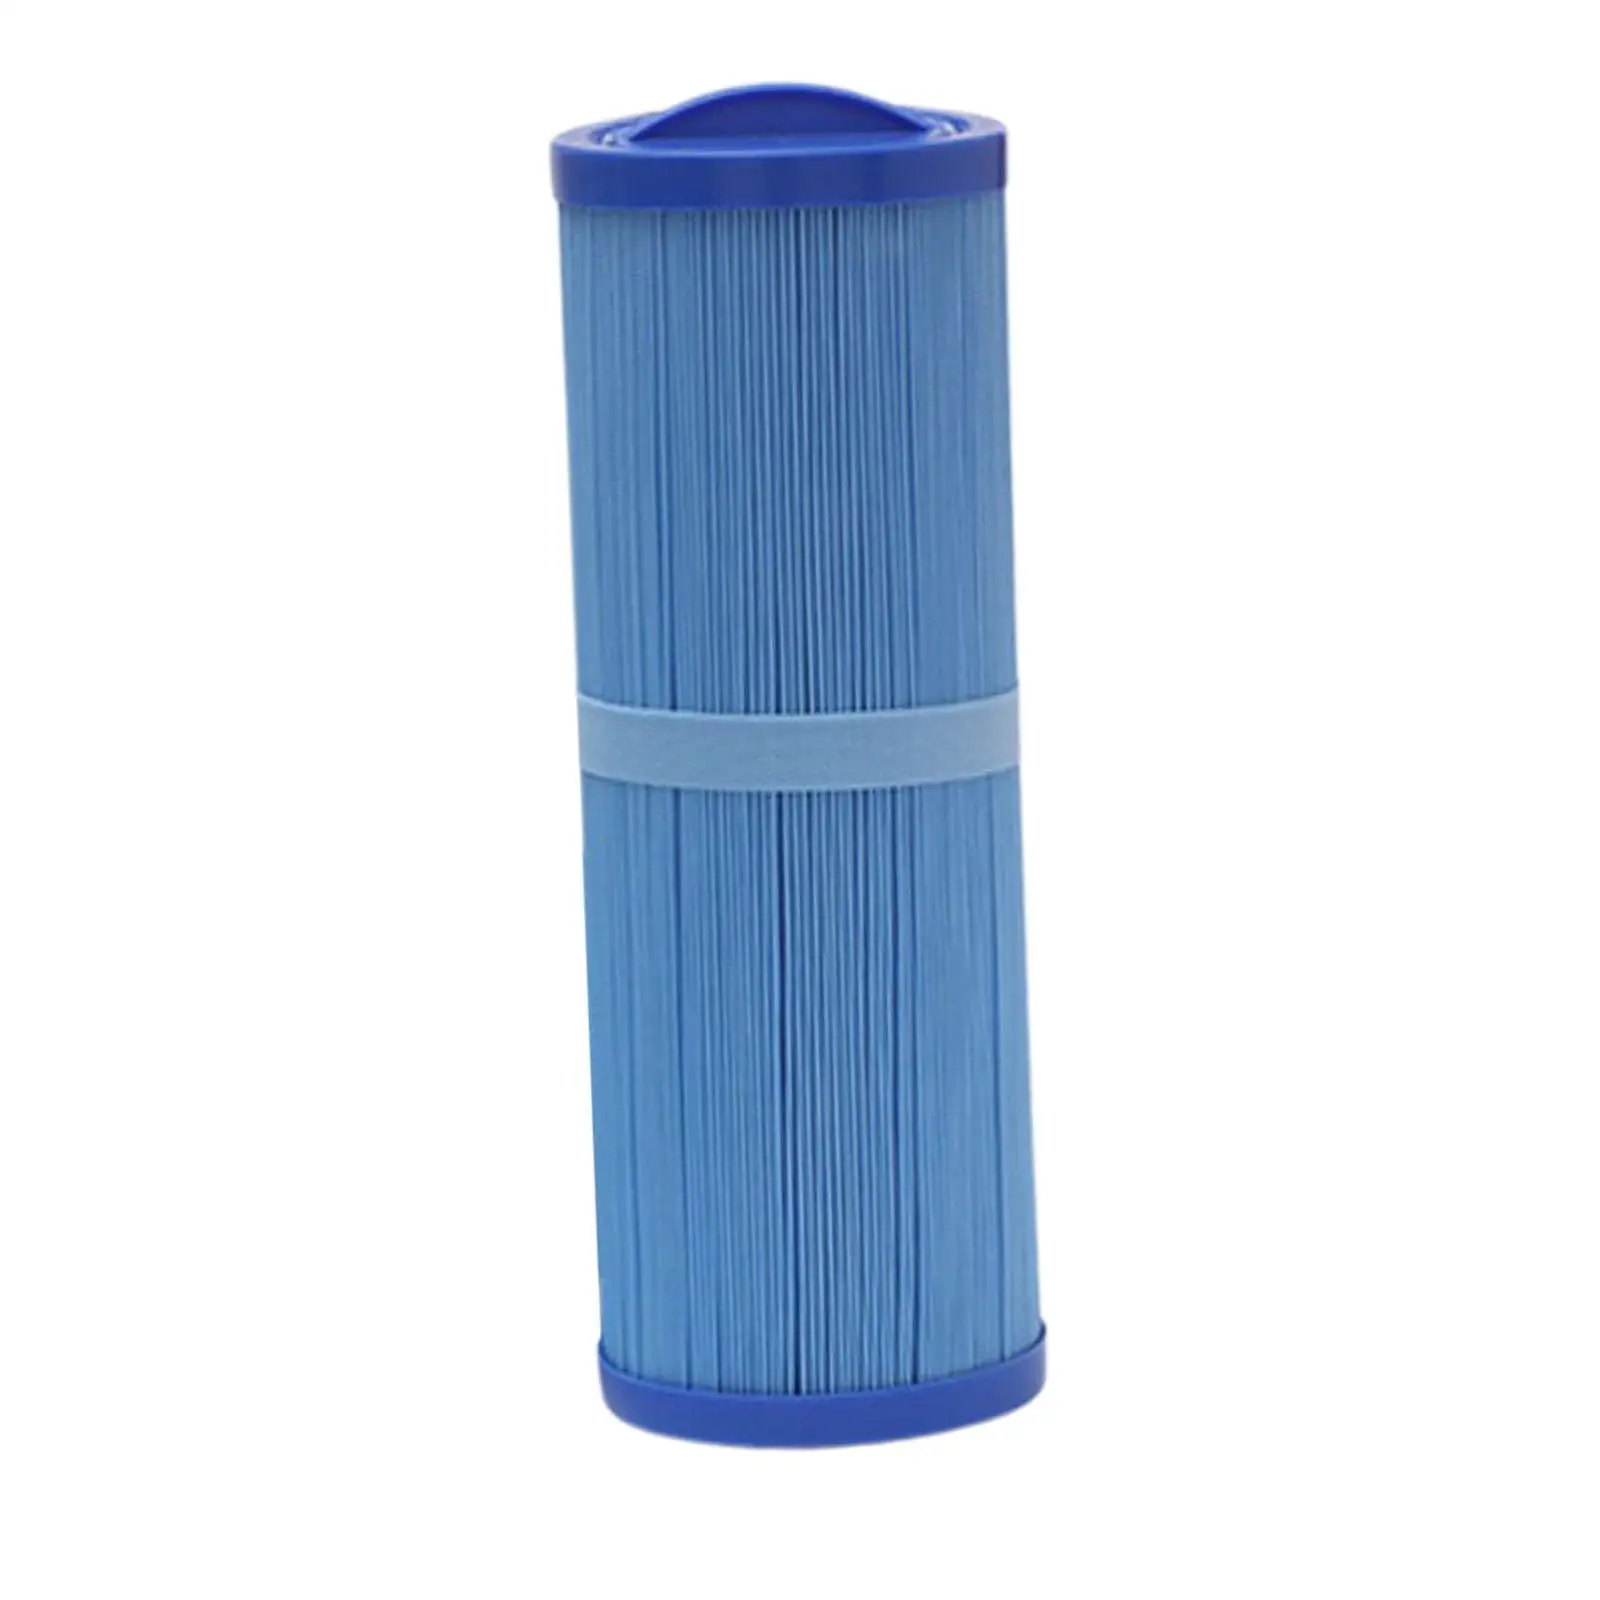 Spa Pool Filter Cartridges Replacement Part for PWW50L-4CH-949 Sifts Out Dirt